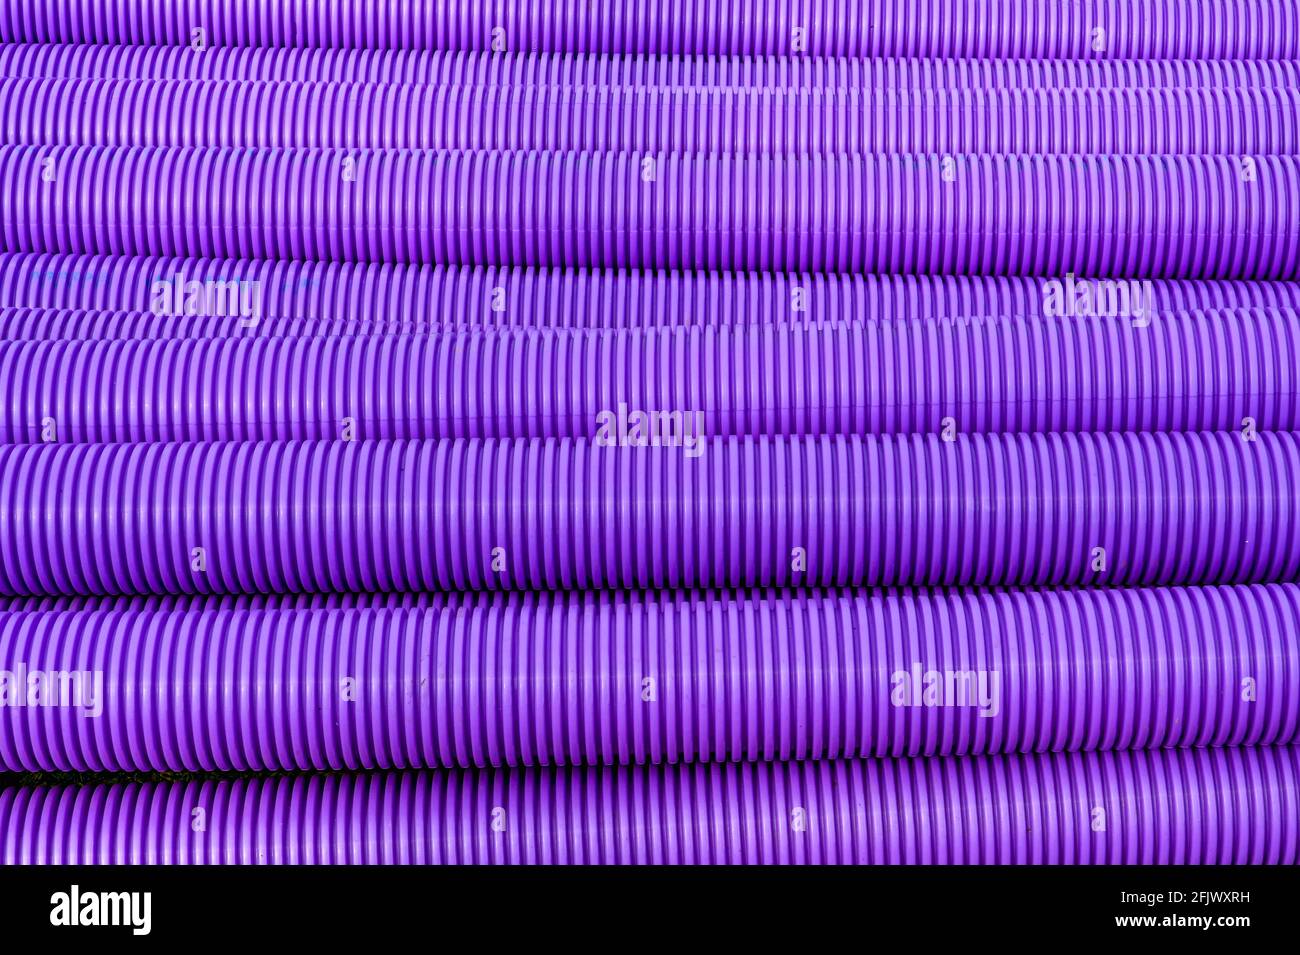 Pattern formed by purple corrugated plastic pipes used for communications cables. No people. Copy space. Stock Photo